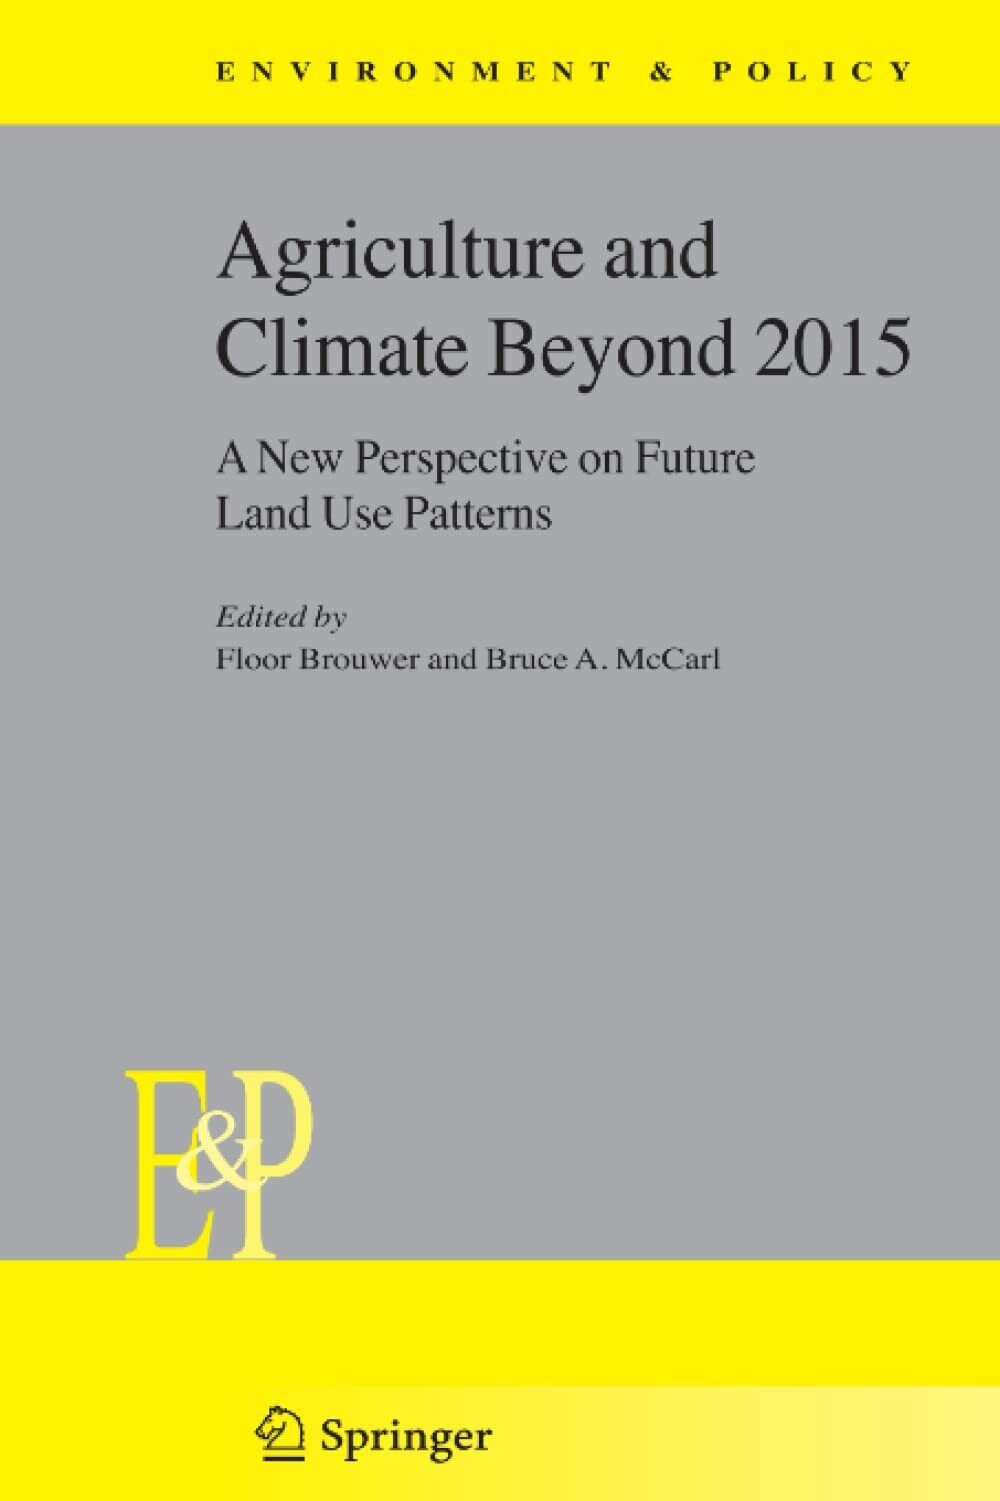 Agriculture and Climate Beyond 2015 - Floor Brouwer - Springer, 2010 libro usato